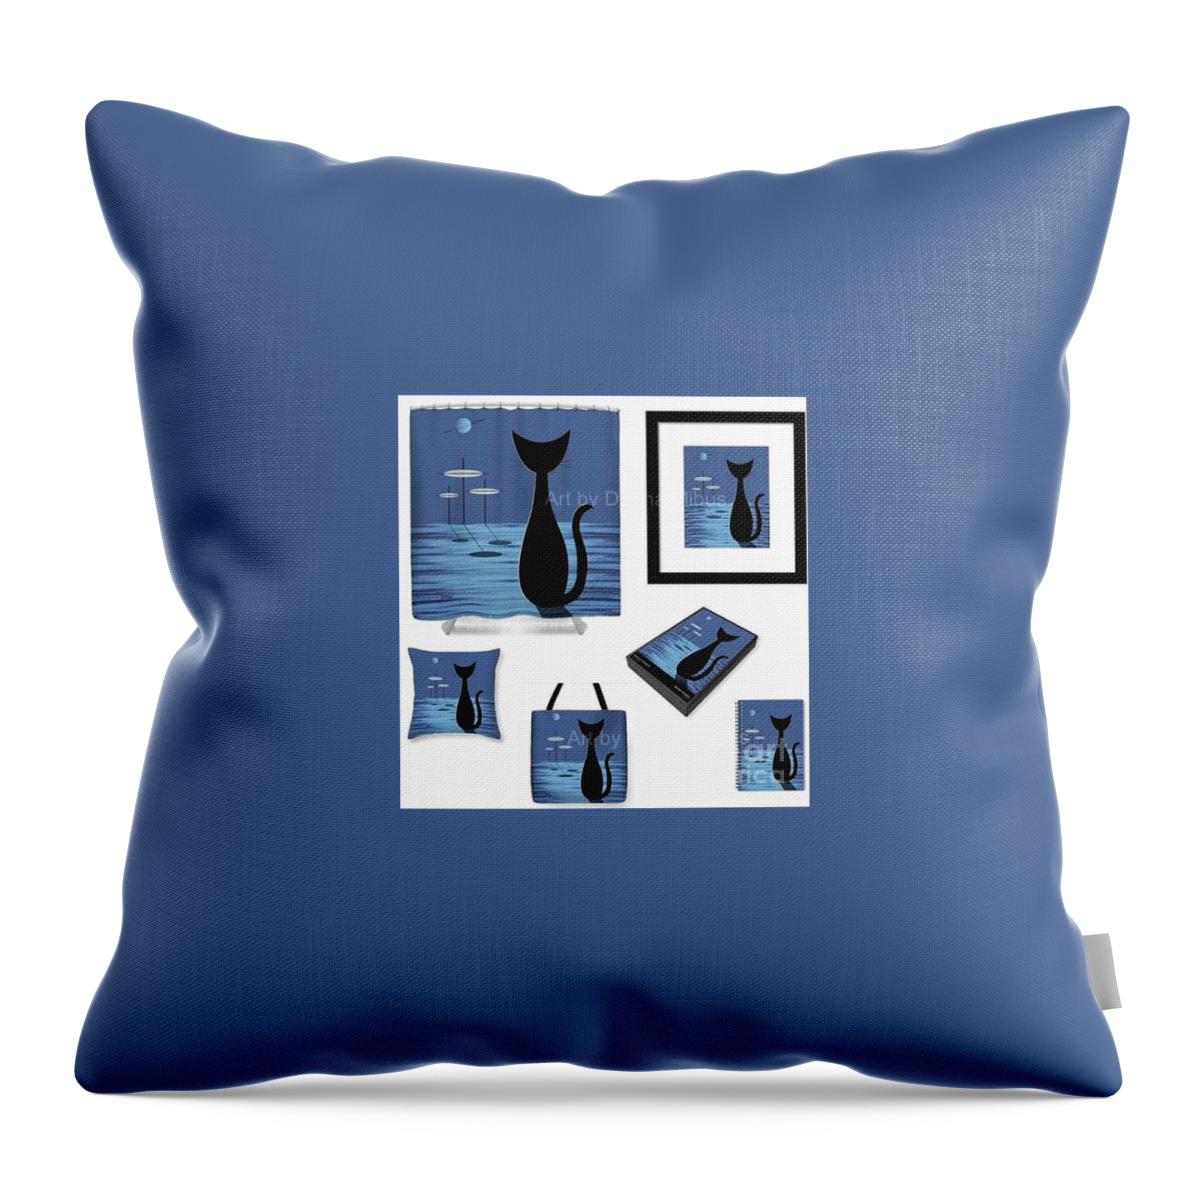  Throw Pillow featuring the digital art Sample by Donna Mibus